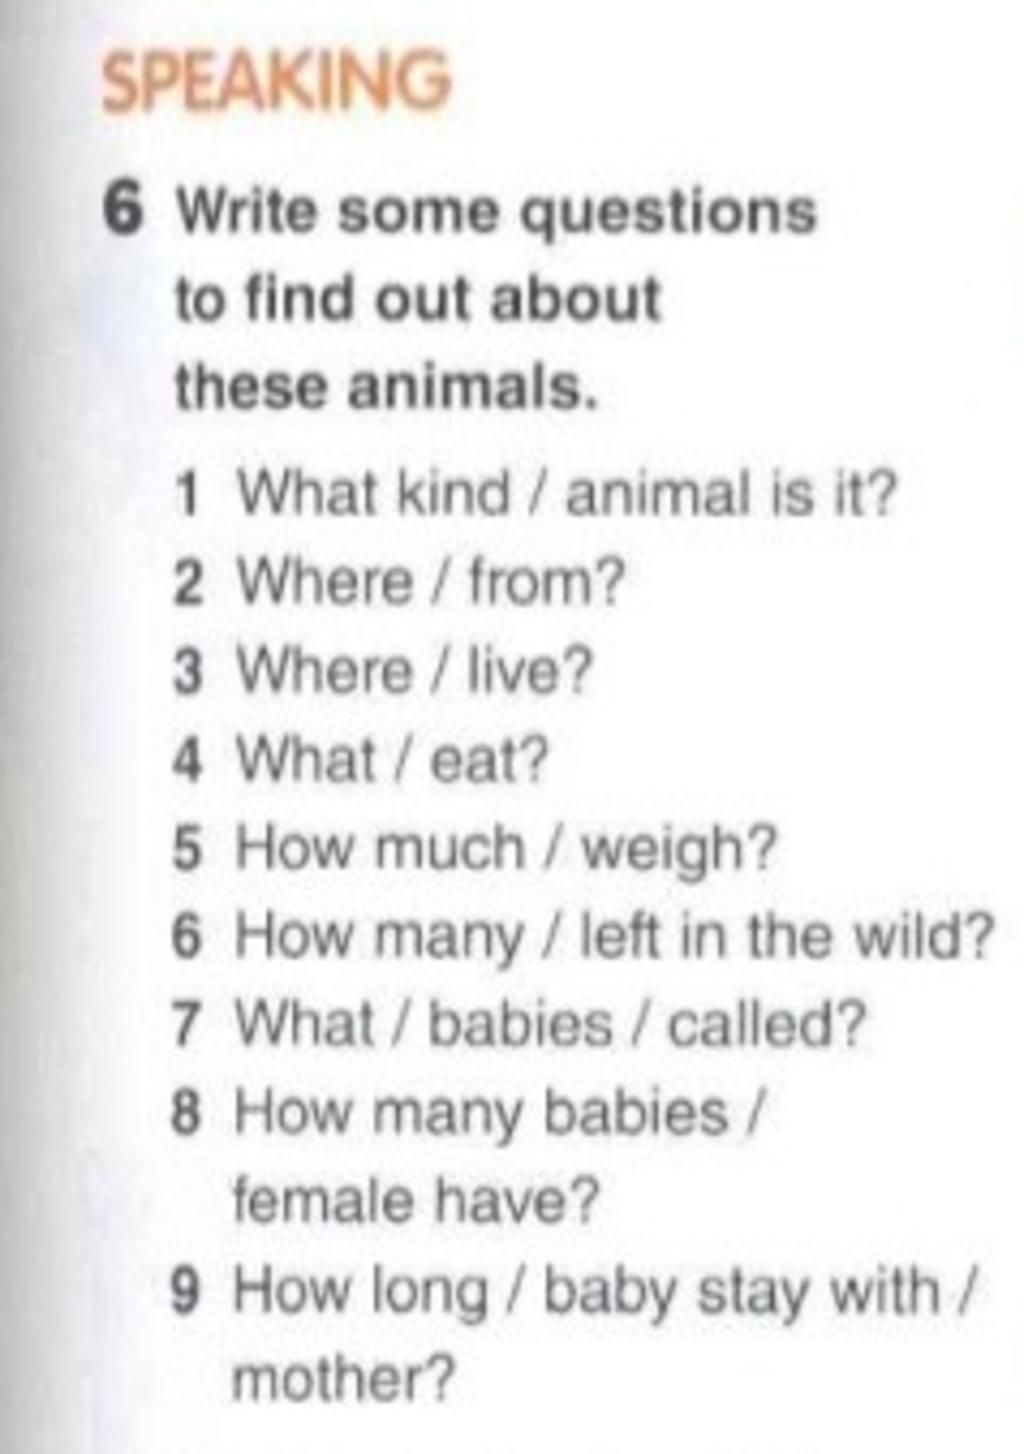 SPEAKING 6 Write some questions to find out about these animals. What kind  / animal is it? 2 Where / from? 3 Where / live? 4 What / eat? 5 How much /  weigh